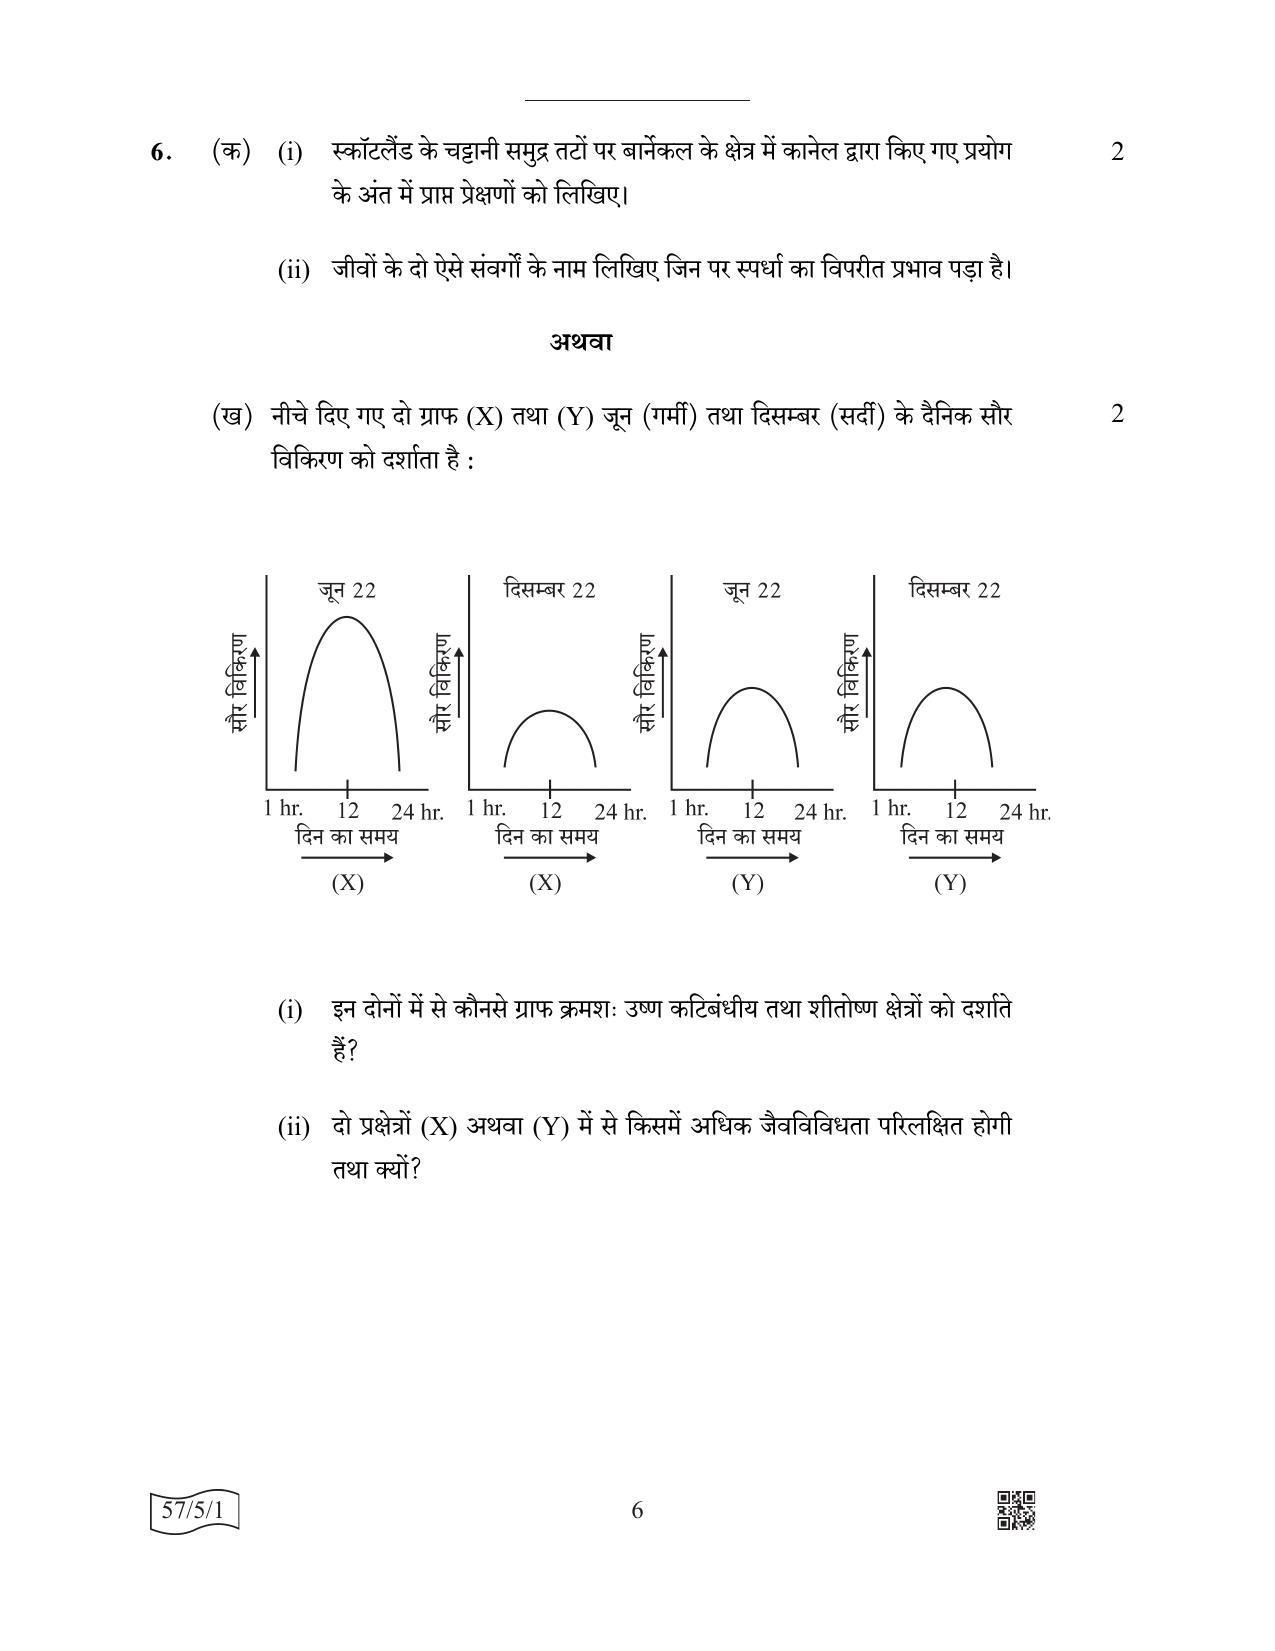 CBSE Class 12 57-5-1 Biology 2022 Question Paper - Page 6